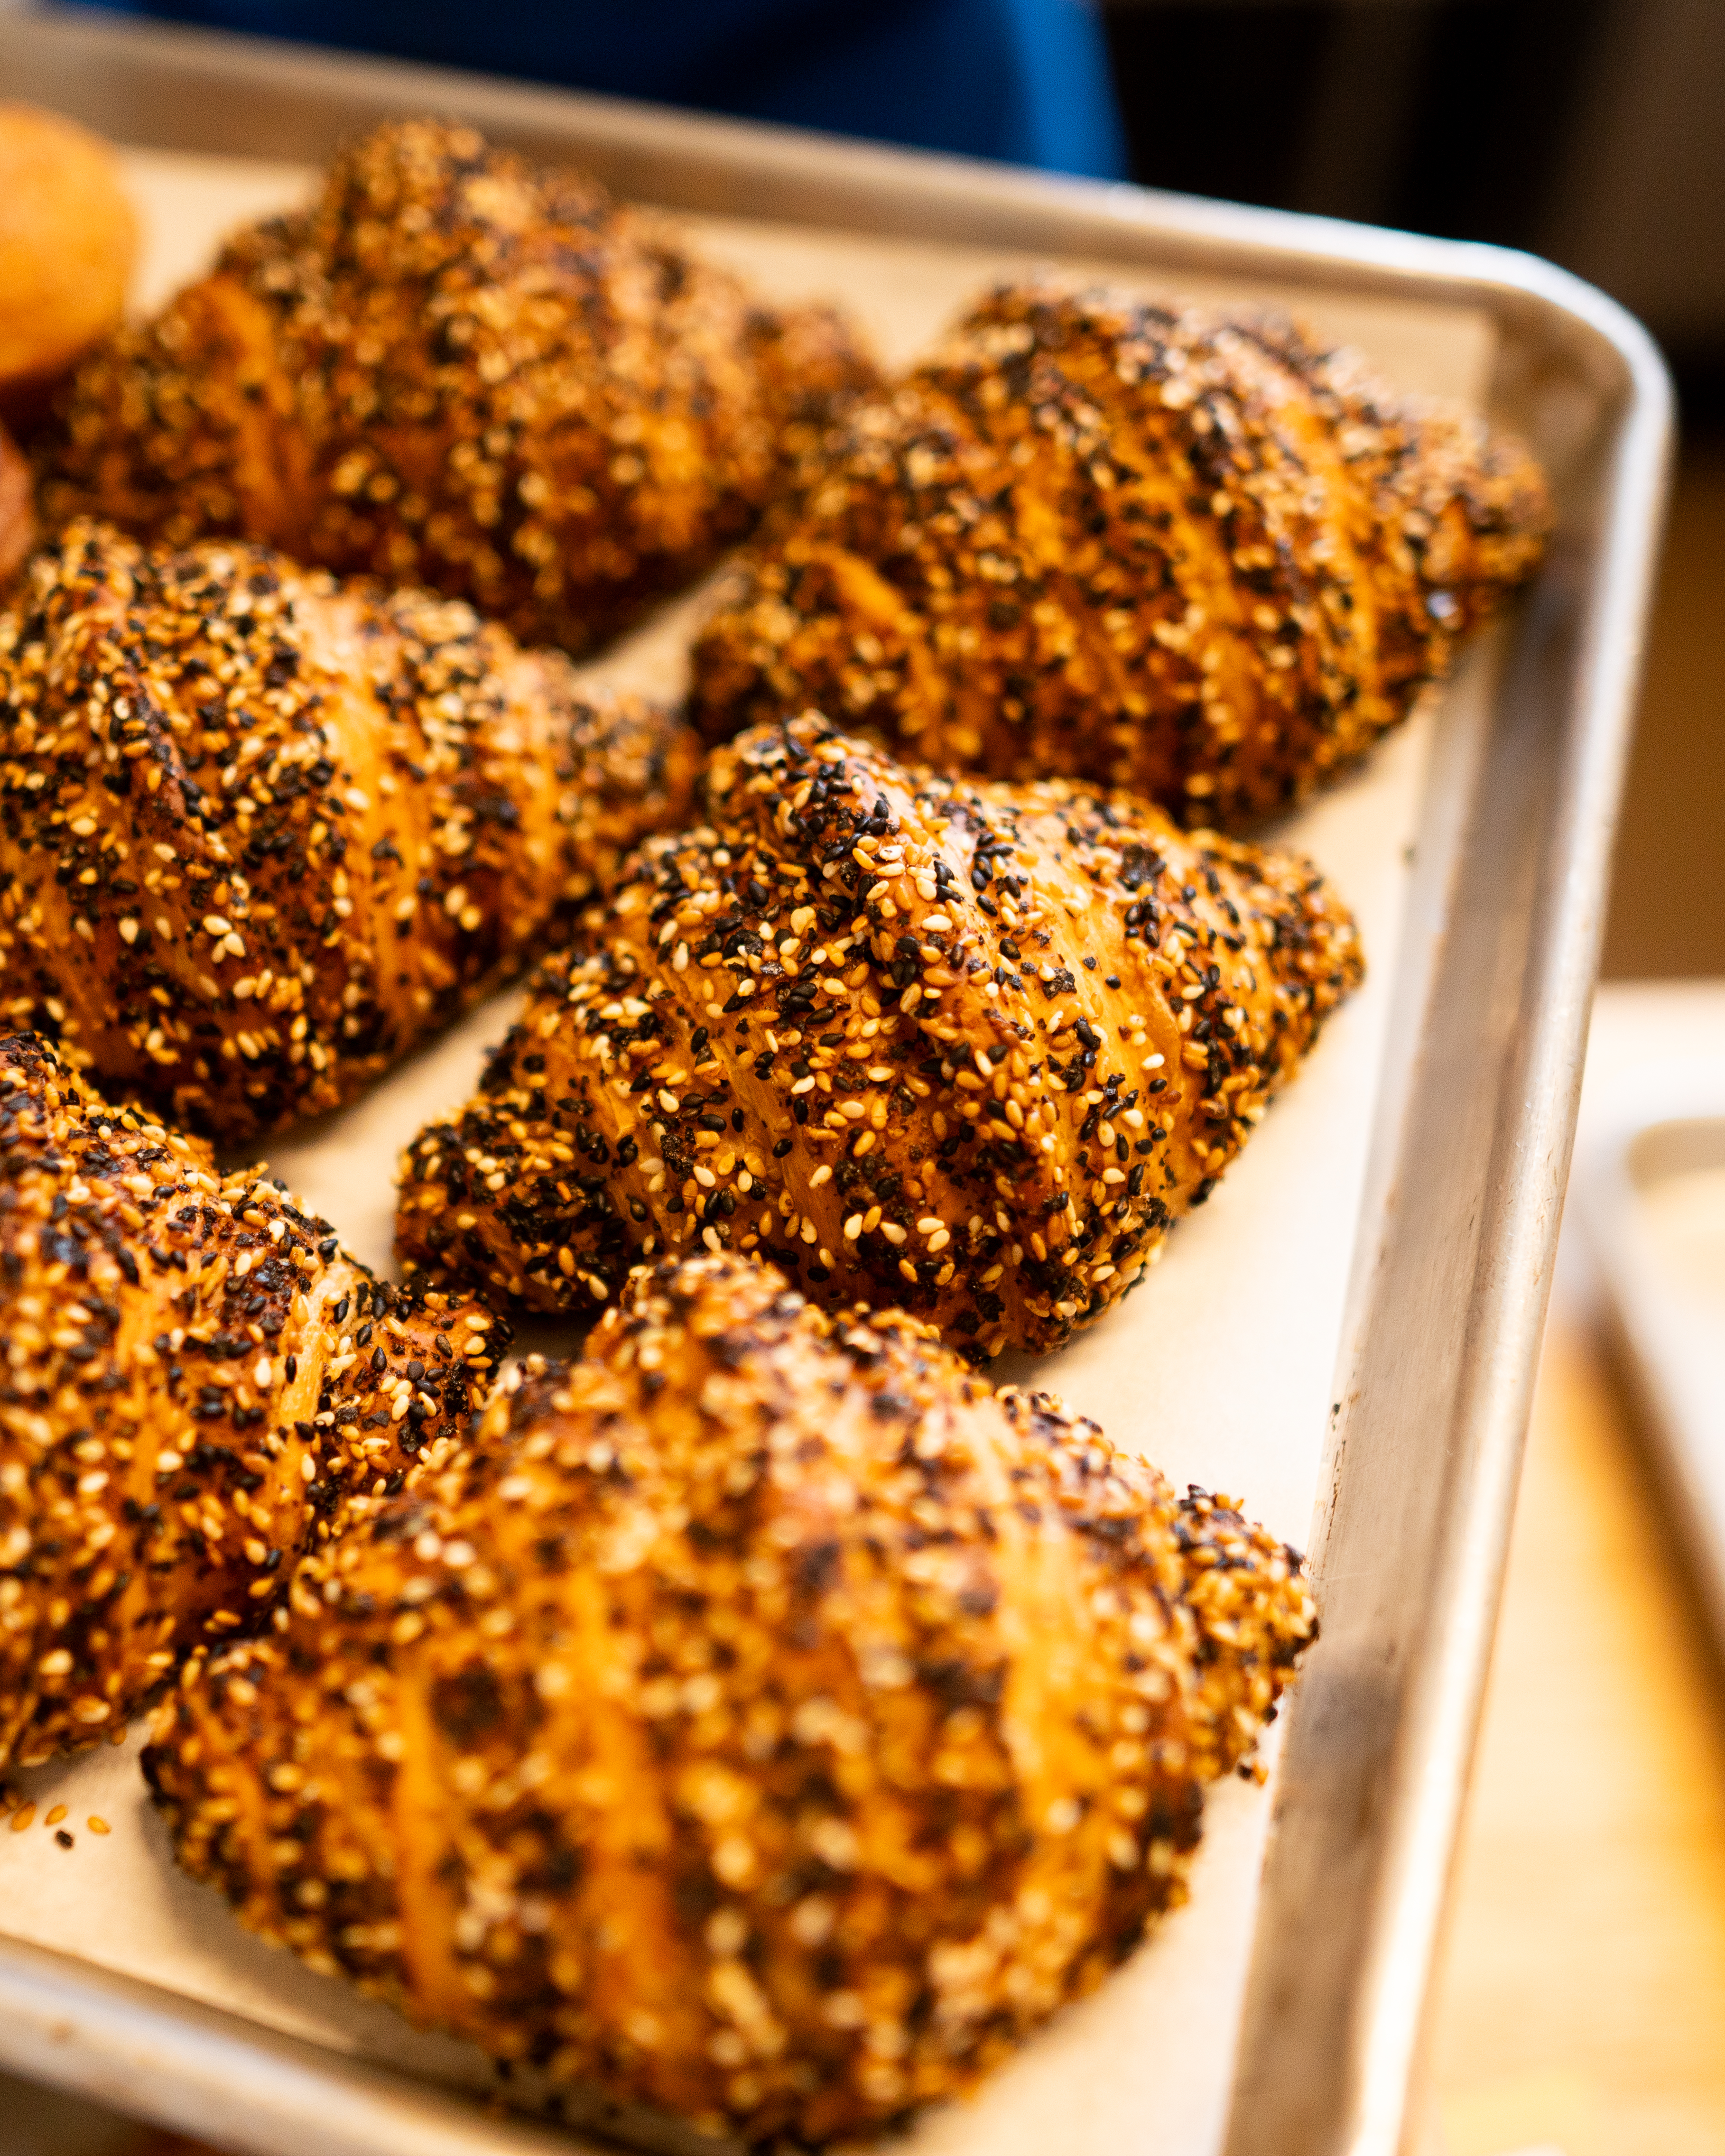 Croissants with sesame seeds on a baking tray